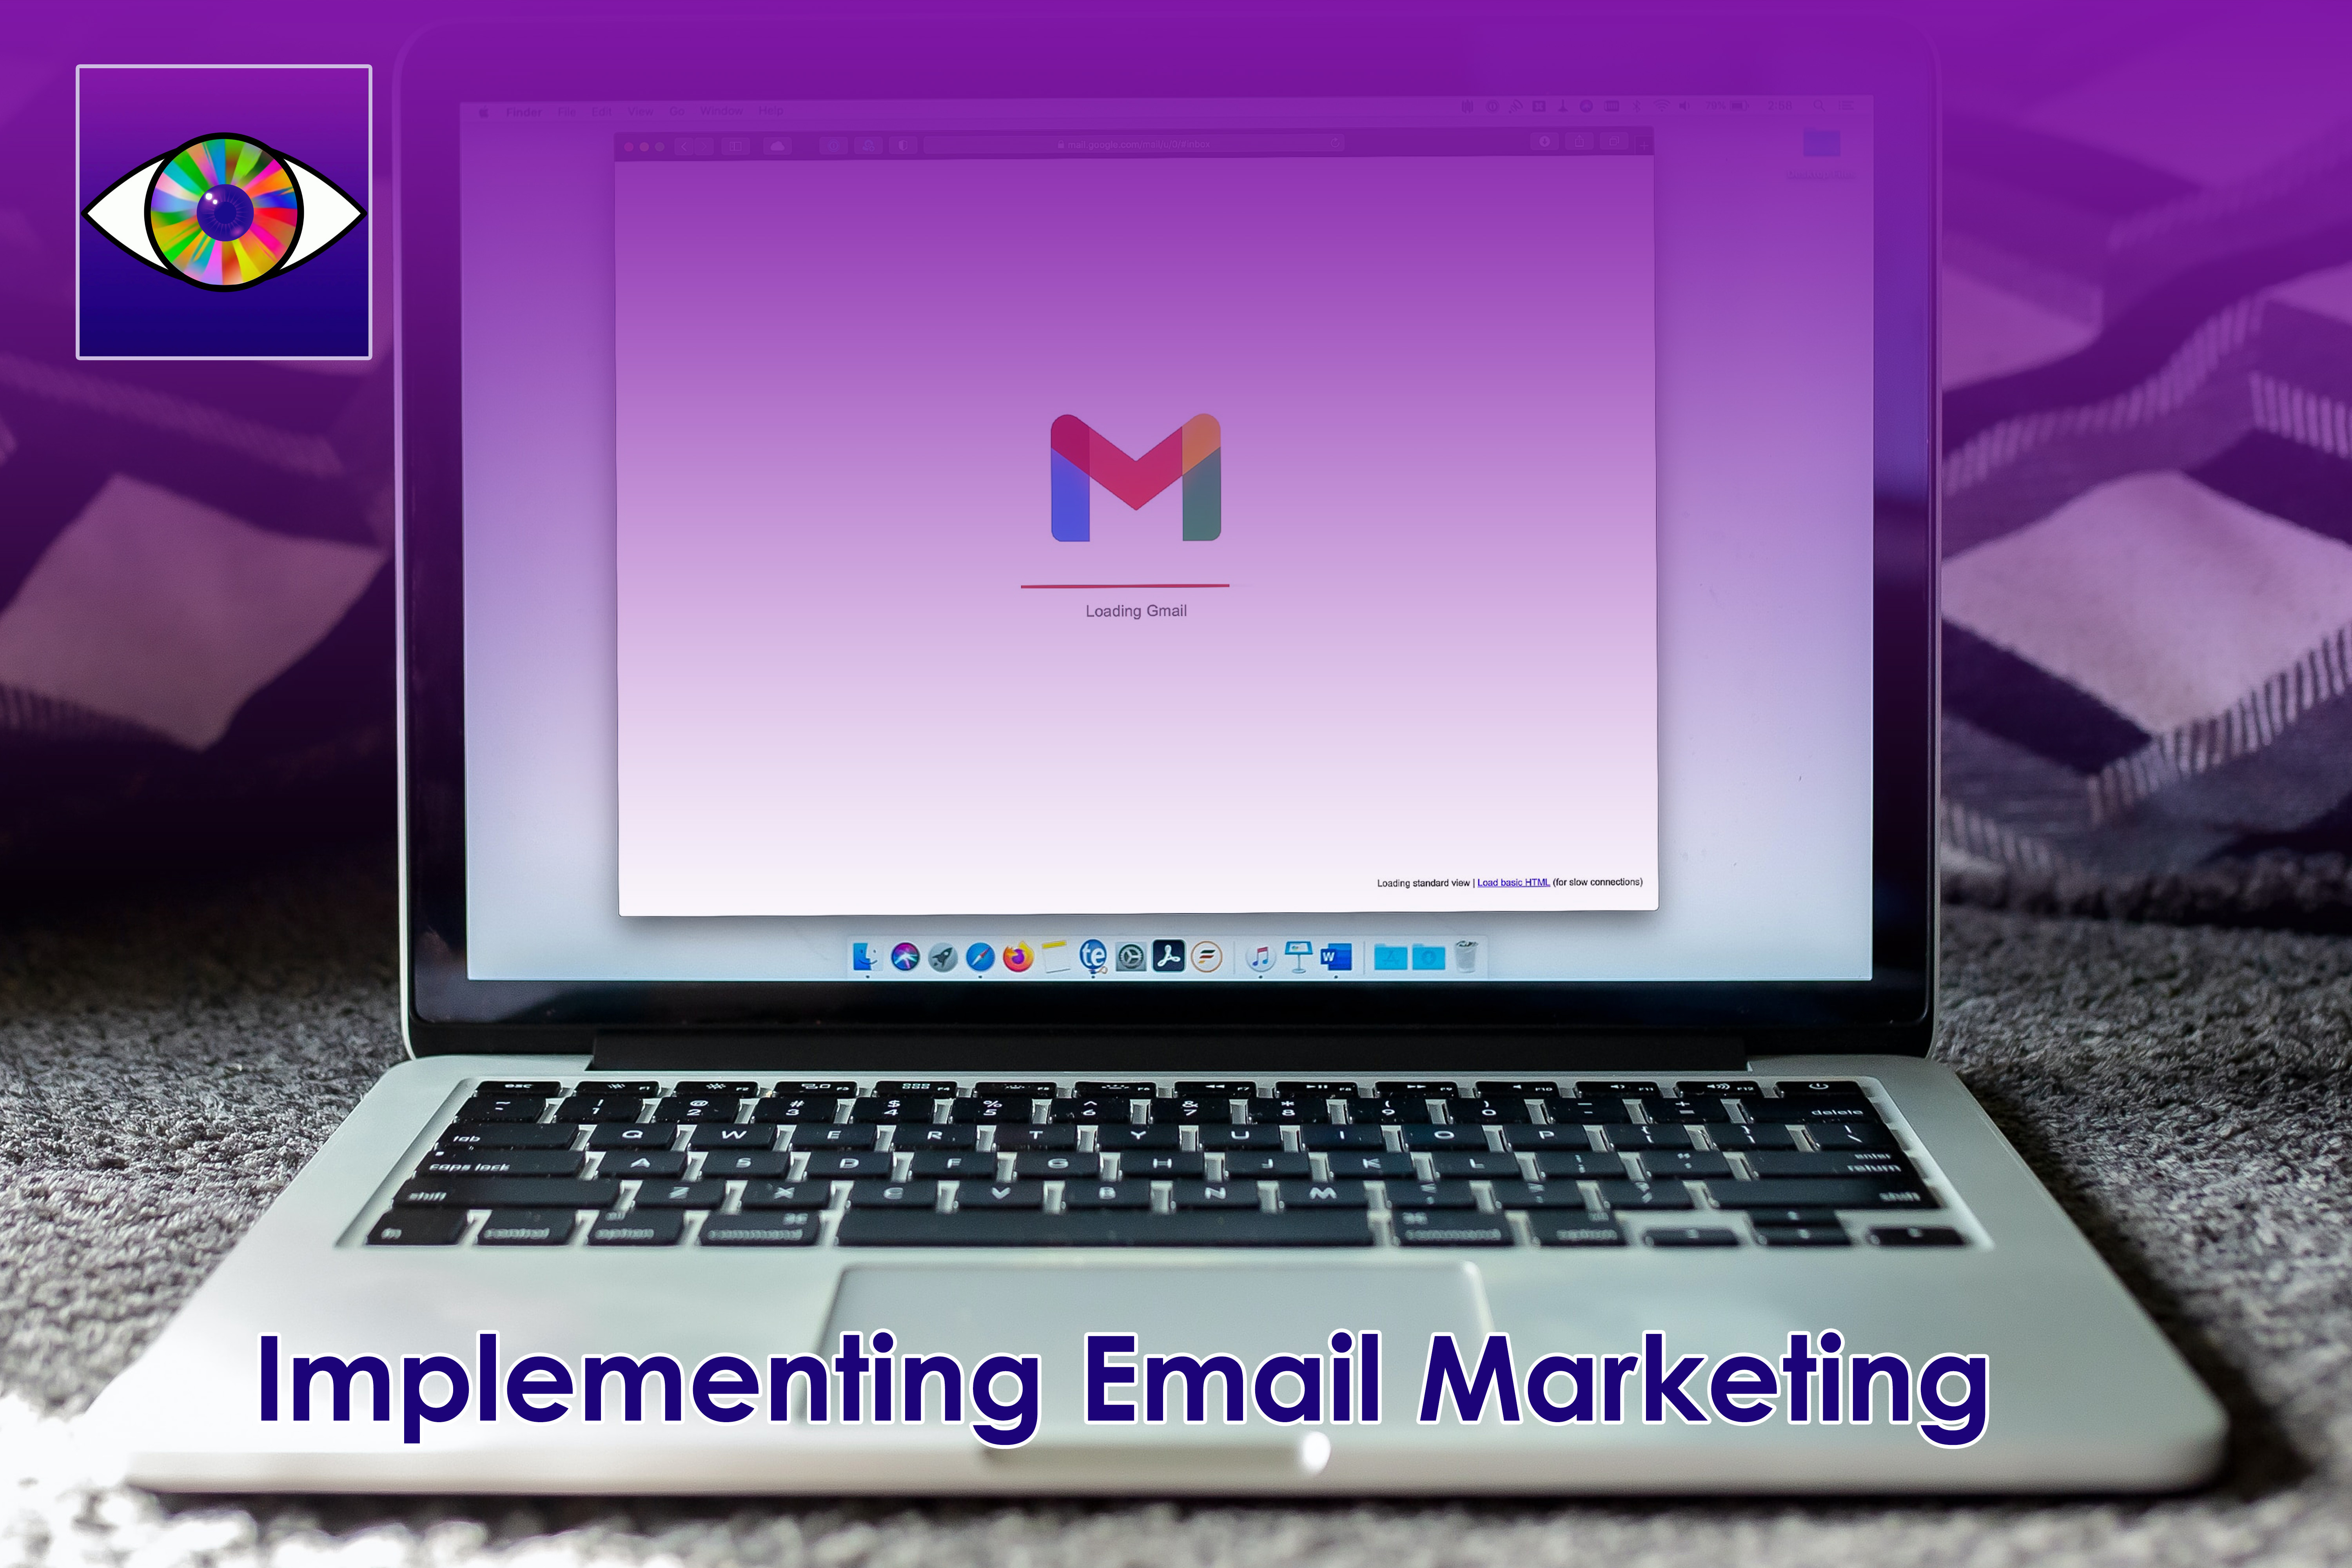 Implementing email marketing campaigns